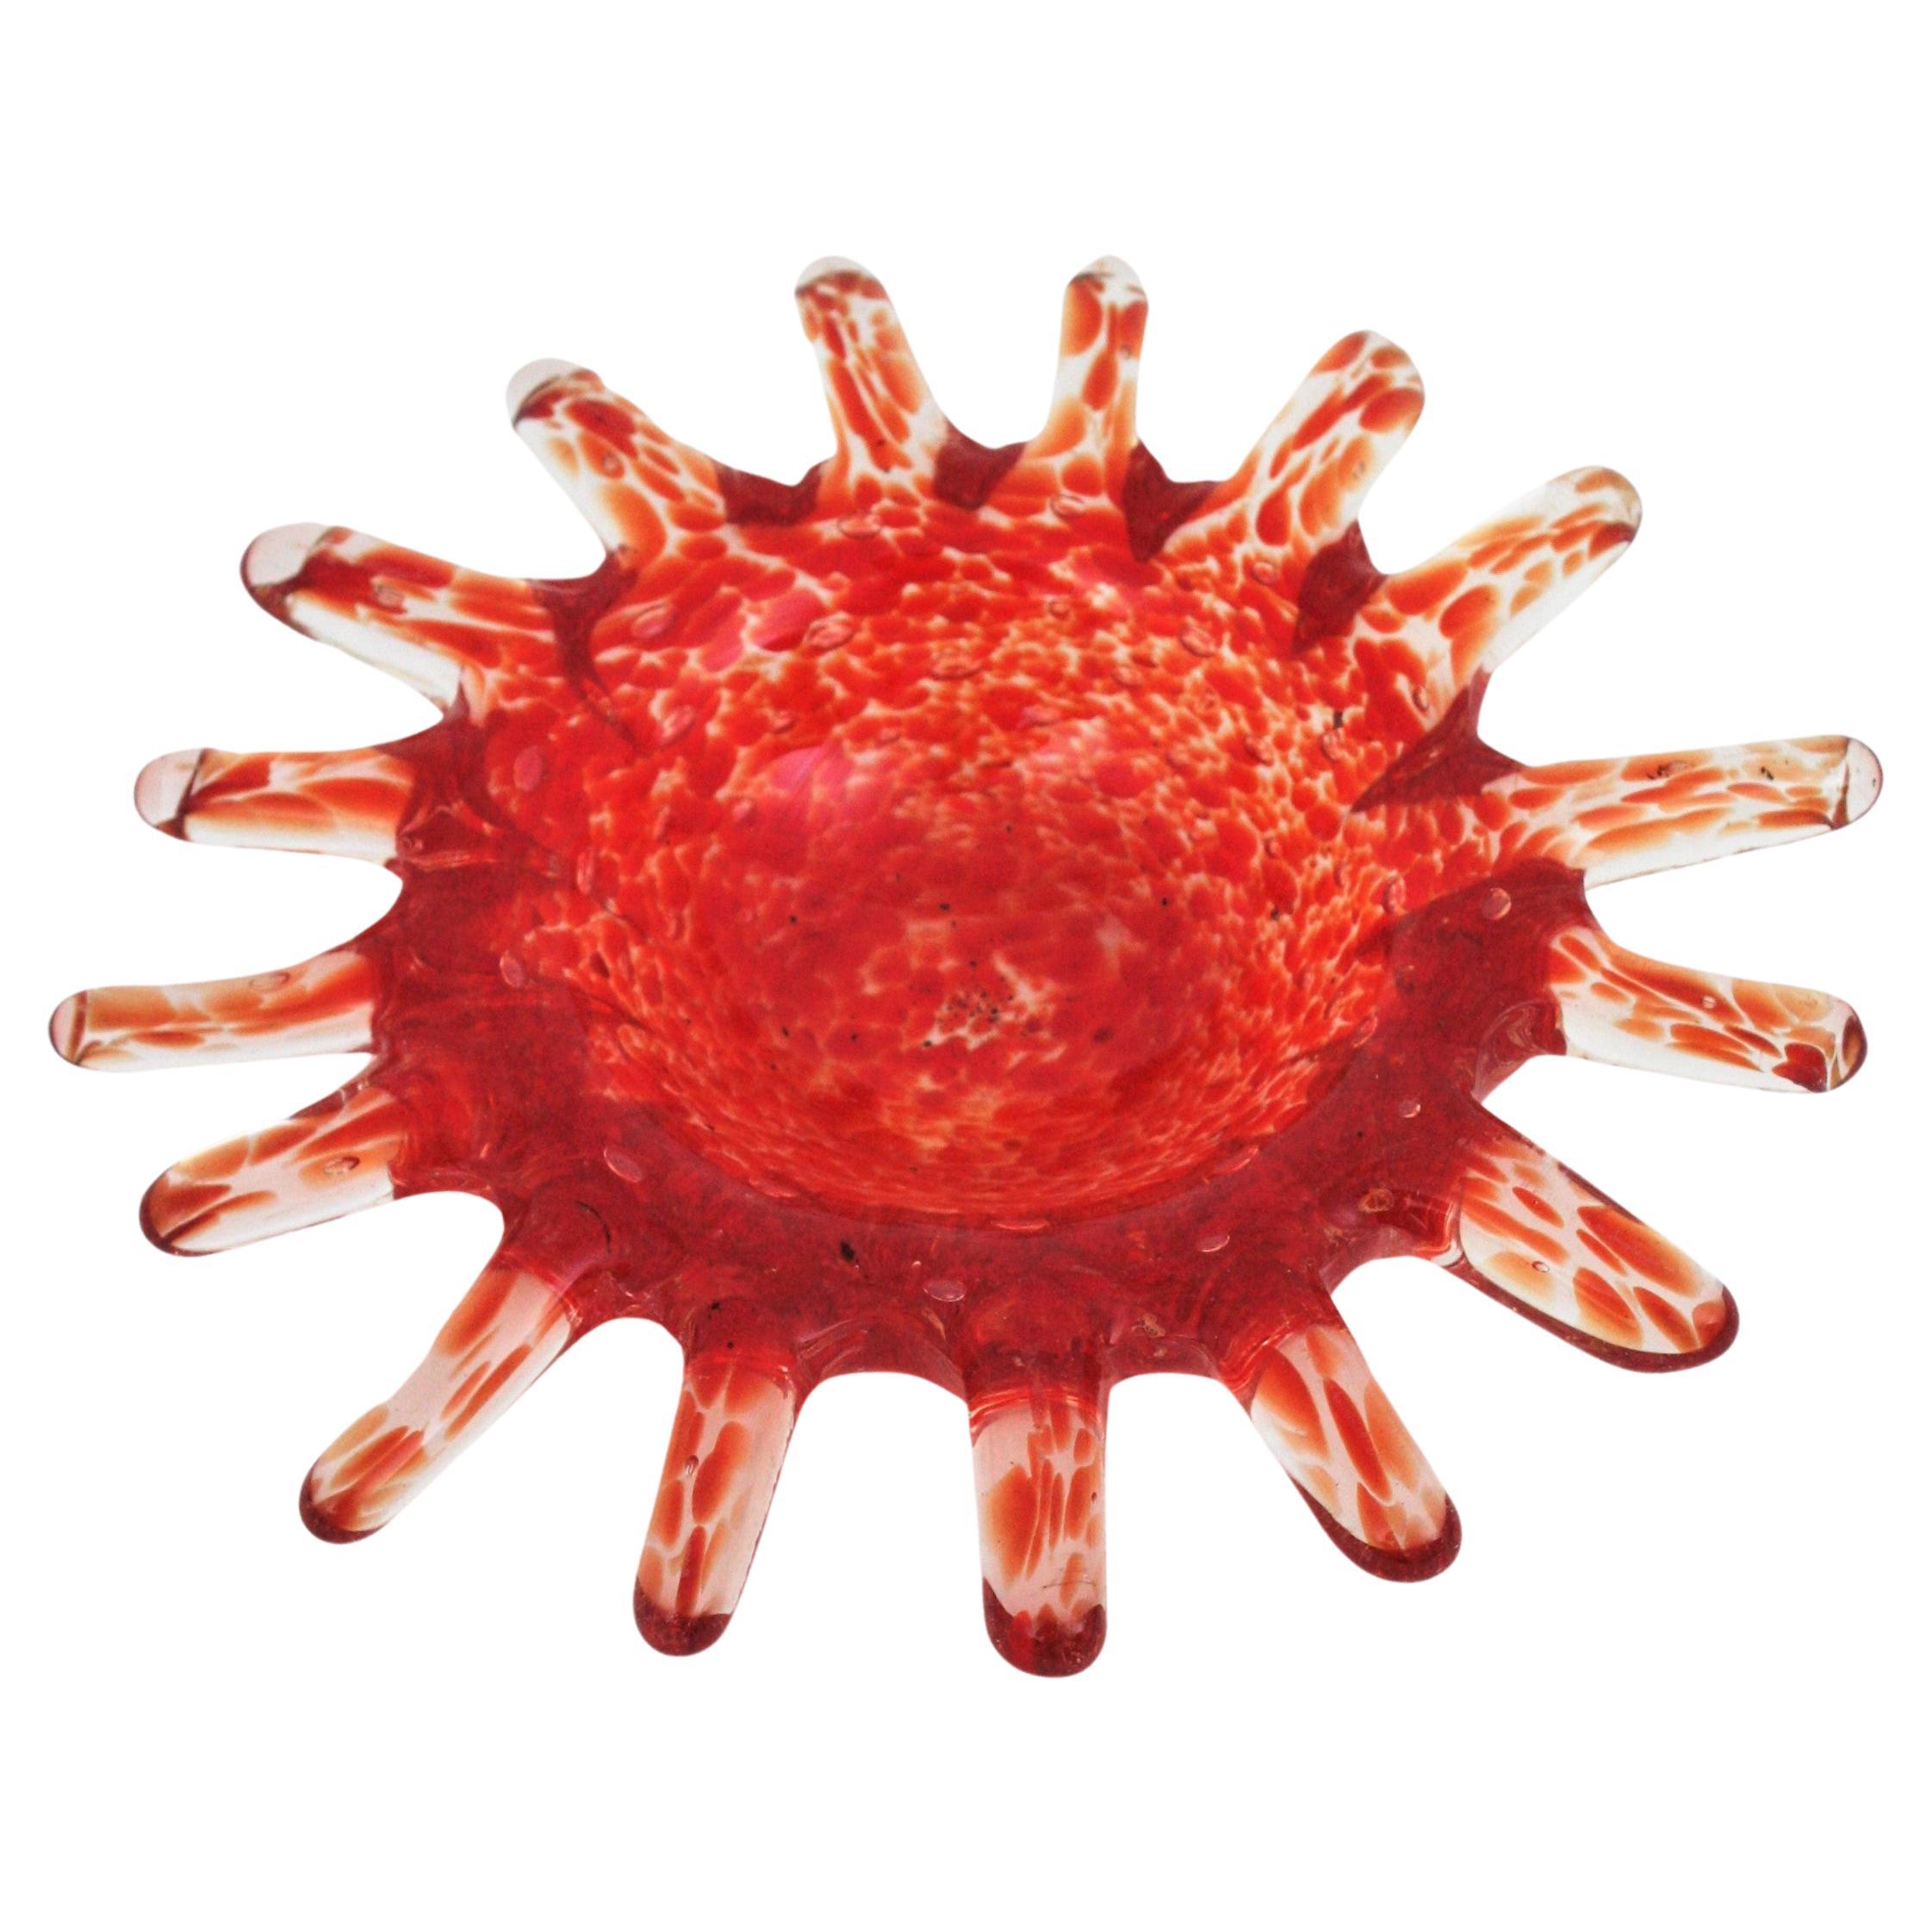 Sunburst Murano glass bowl or ashtray, orange, red and clear glass. Italy, 1960s
Spotted decorations in shades of orange in a clear background with air bubbles.
Use it as vide-poche, ashtray, or decorative bowl. Place it alone or display it with